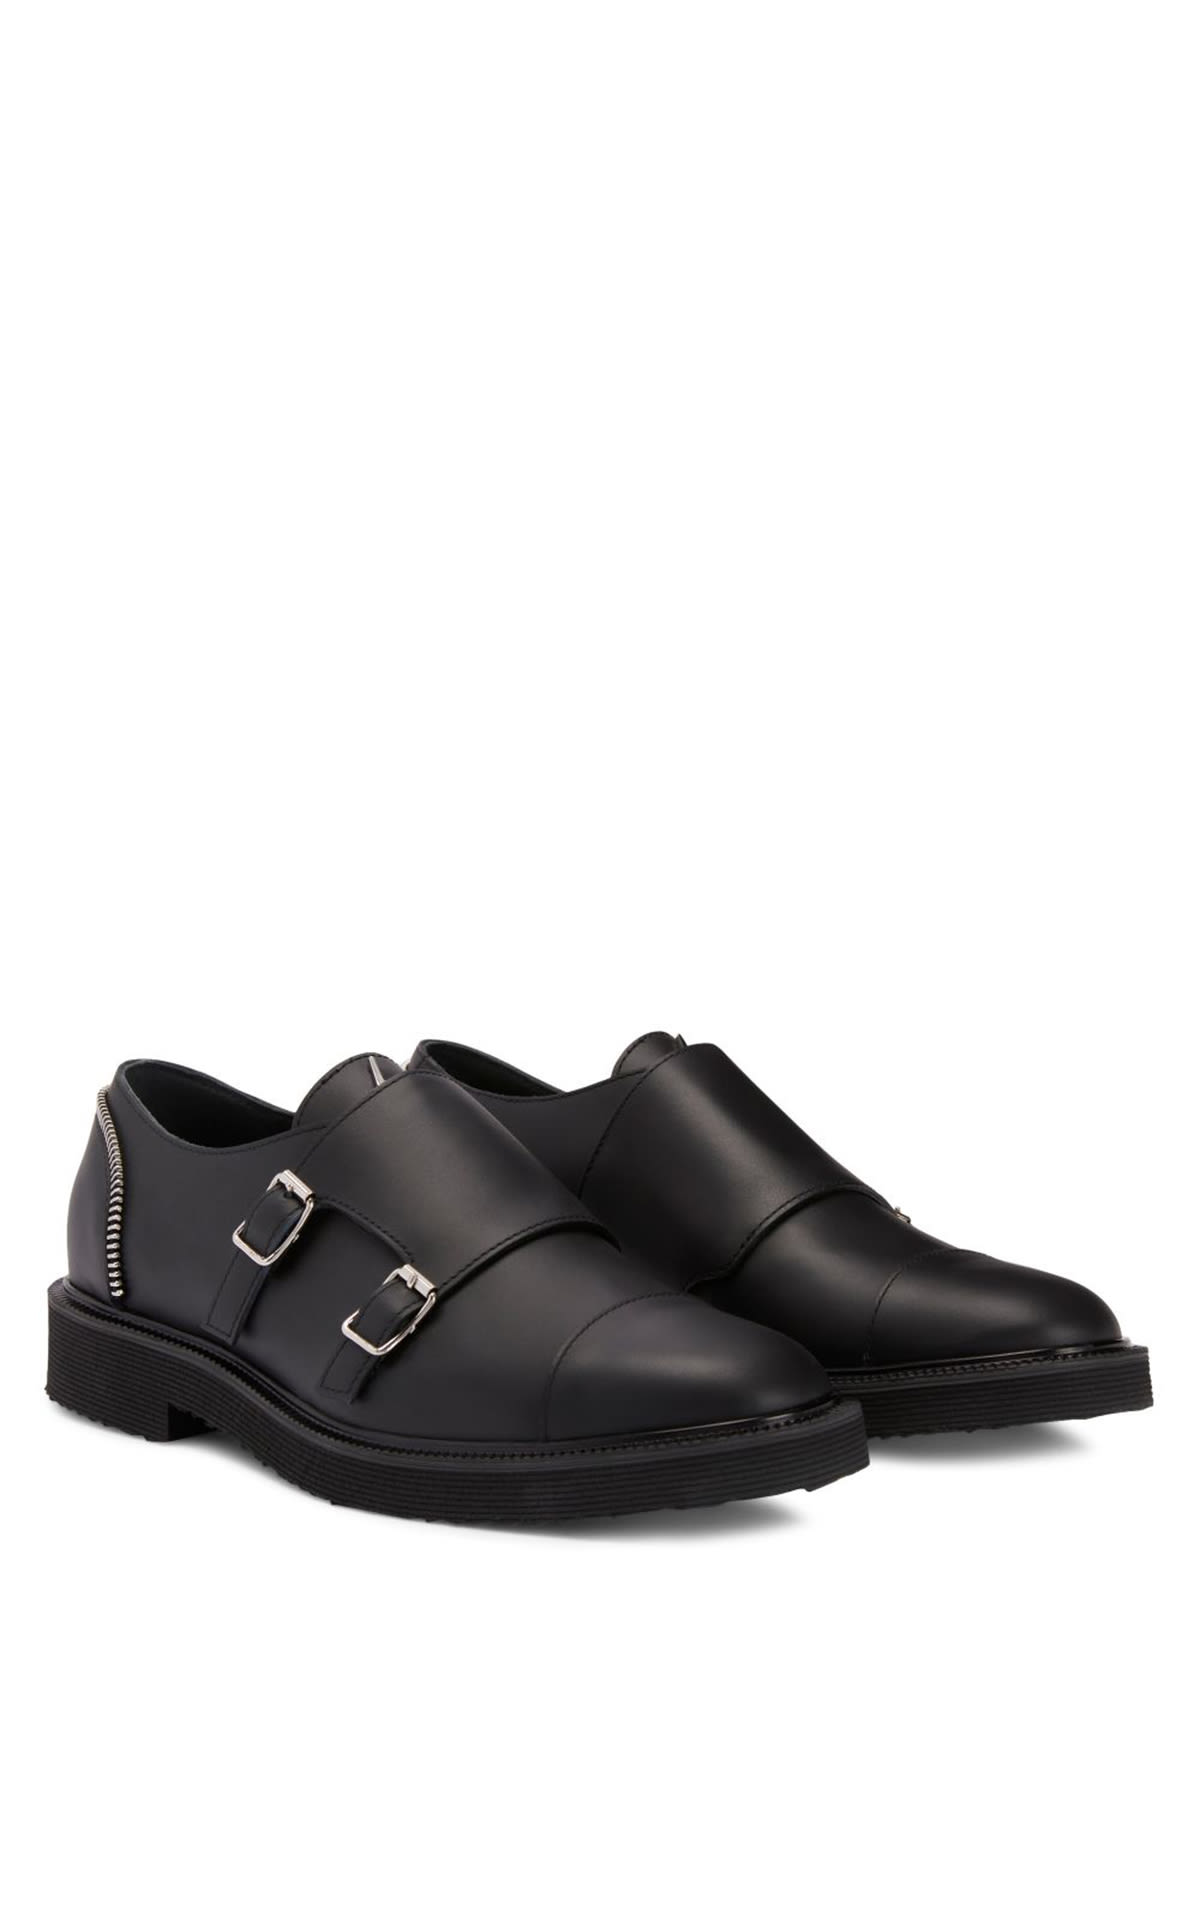 Guiessep Zanotti zip-trimmed leather loafers from Bicester Village